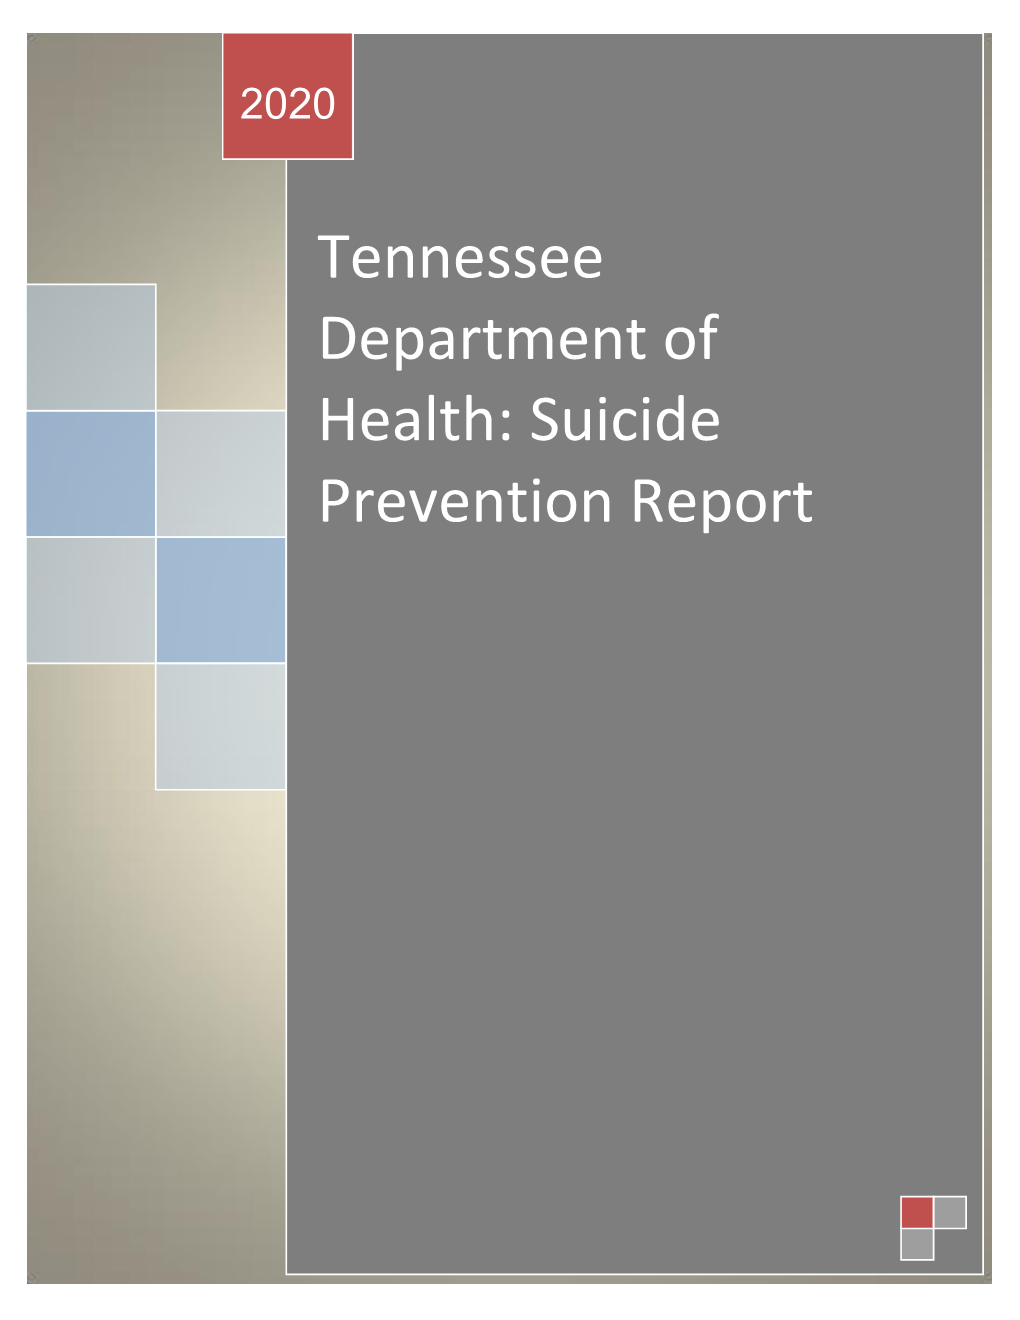 Tennessee Department of Health: Suicide Prevention Report